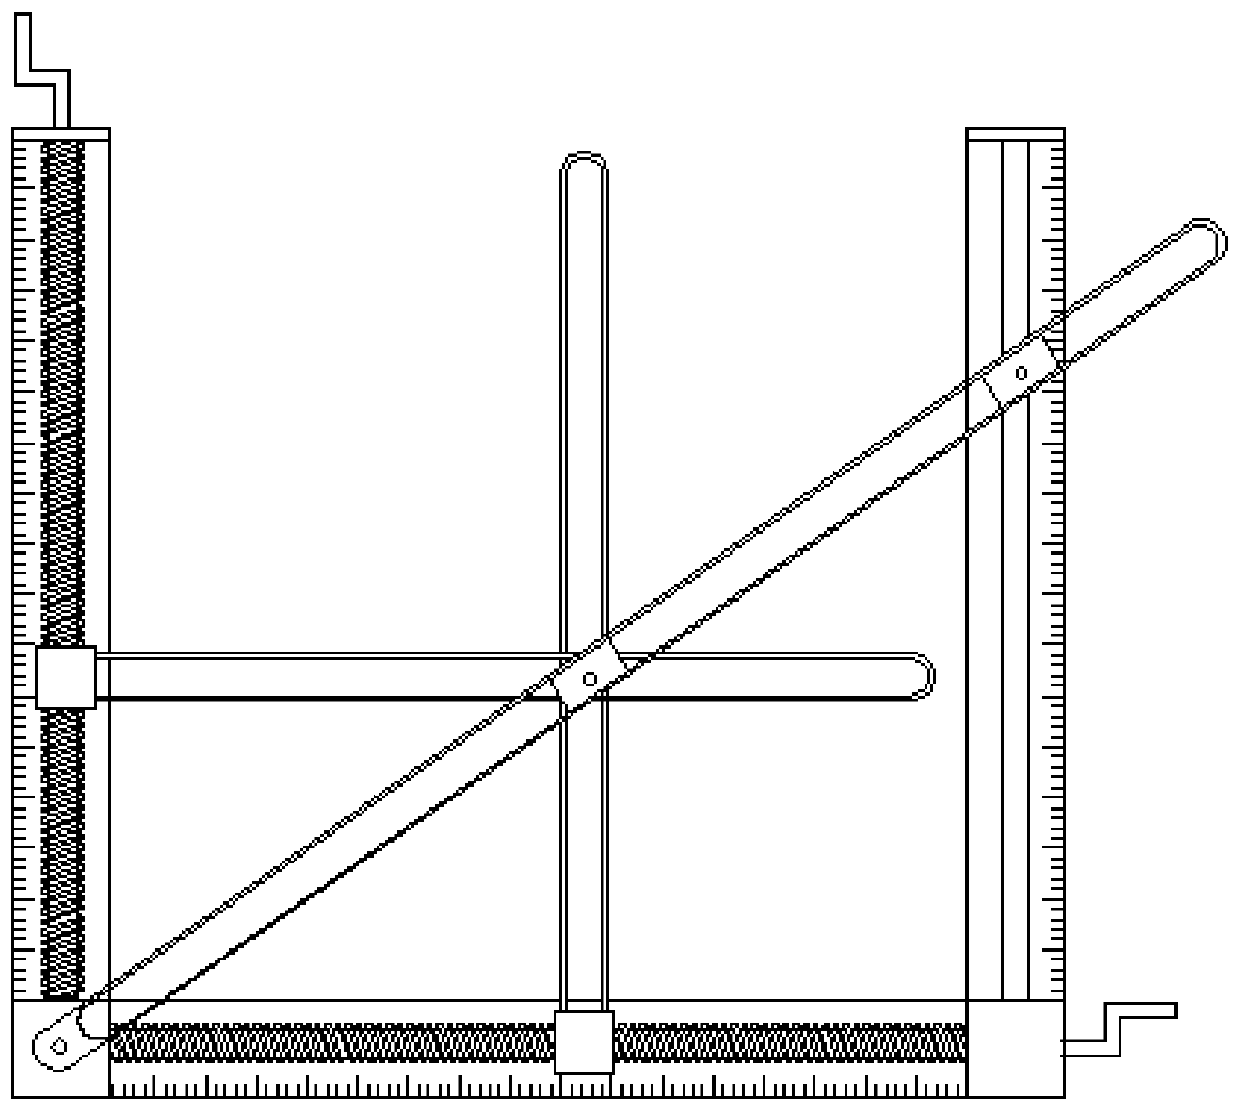 Auxiliary cutting measurement device for adjusting size of floor tile